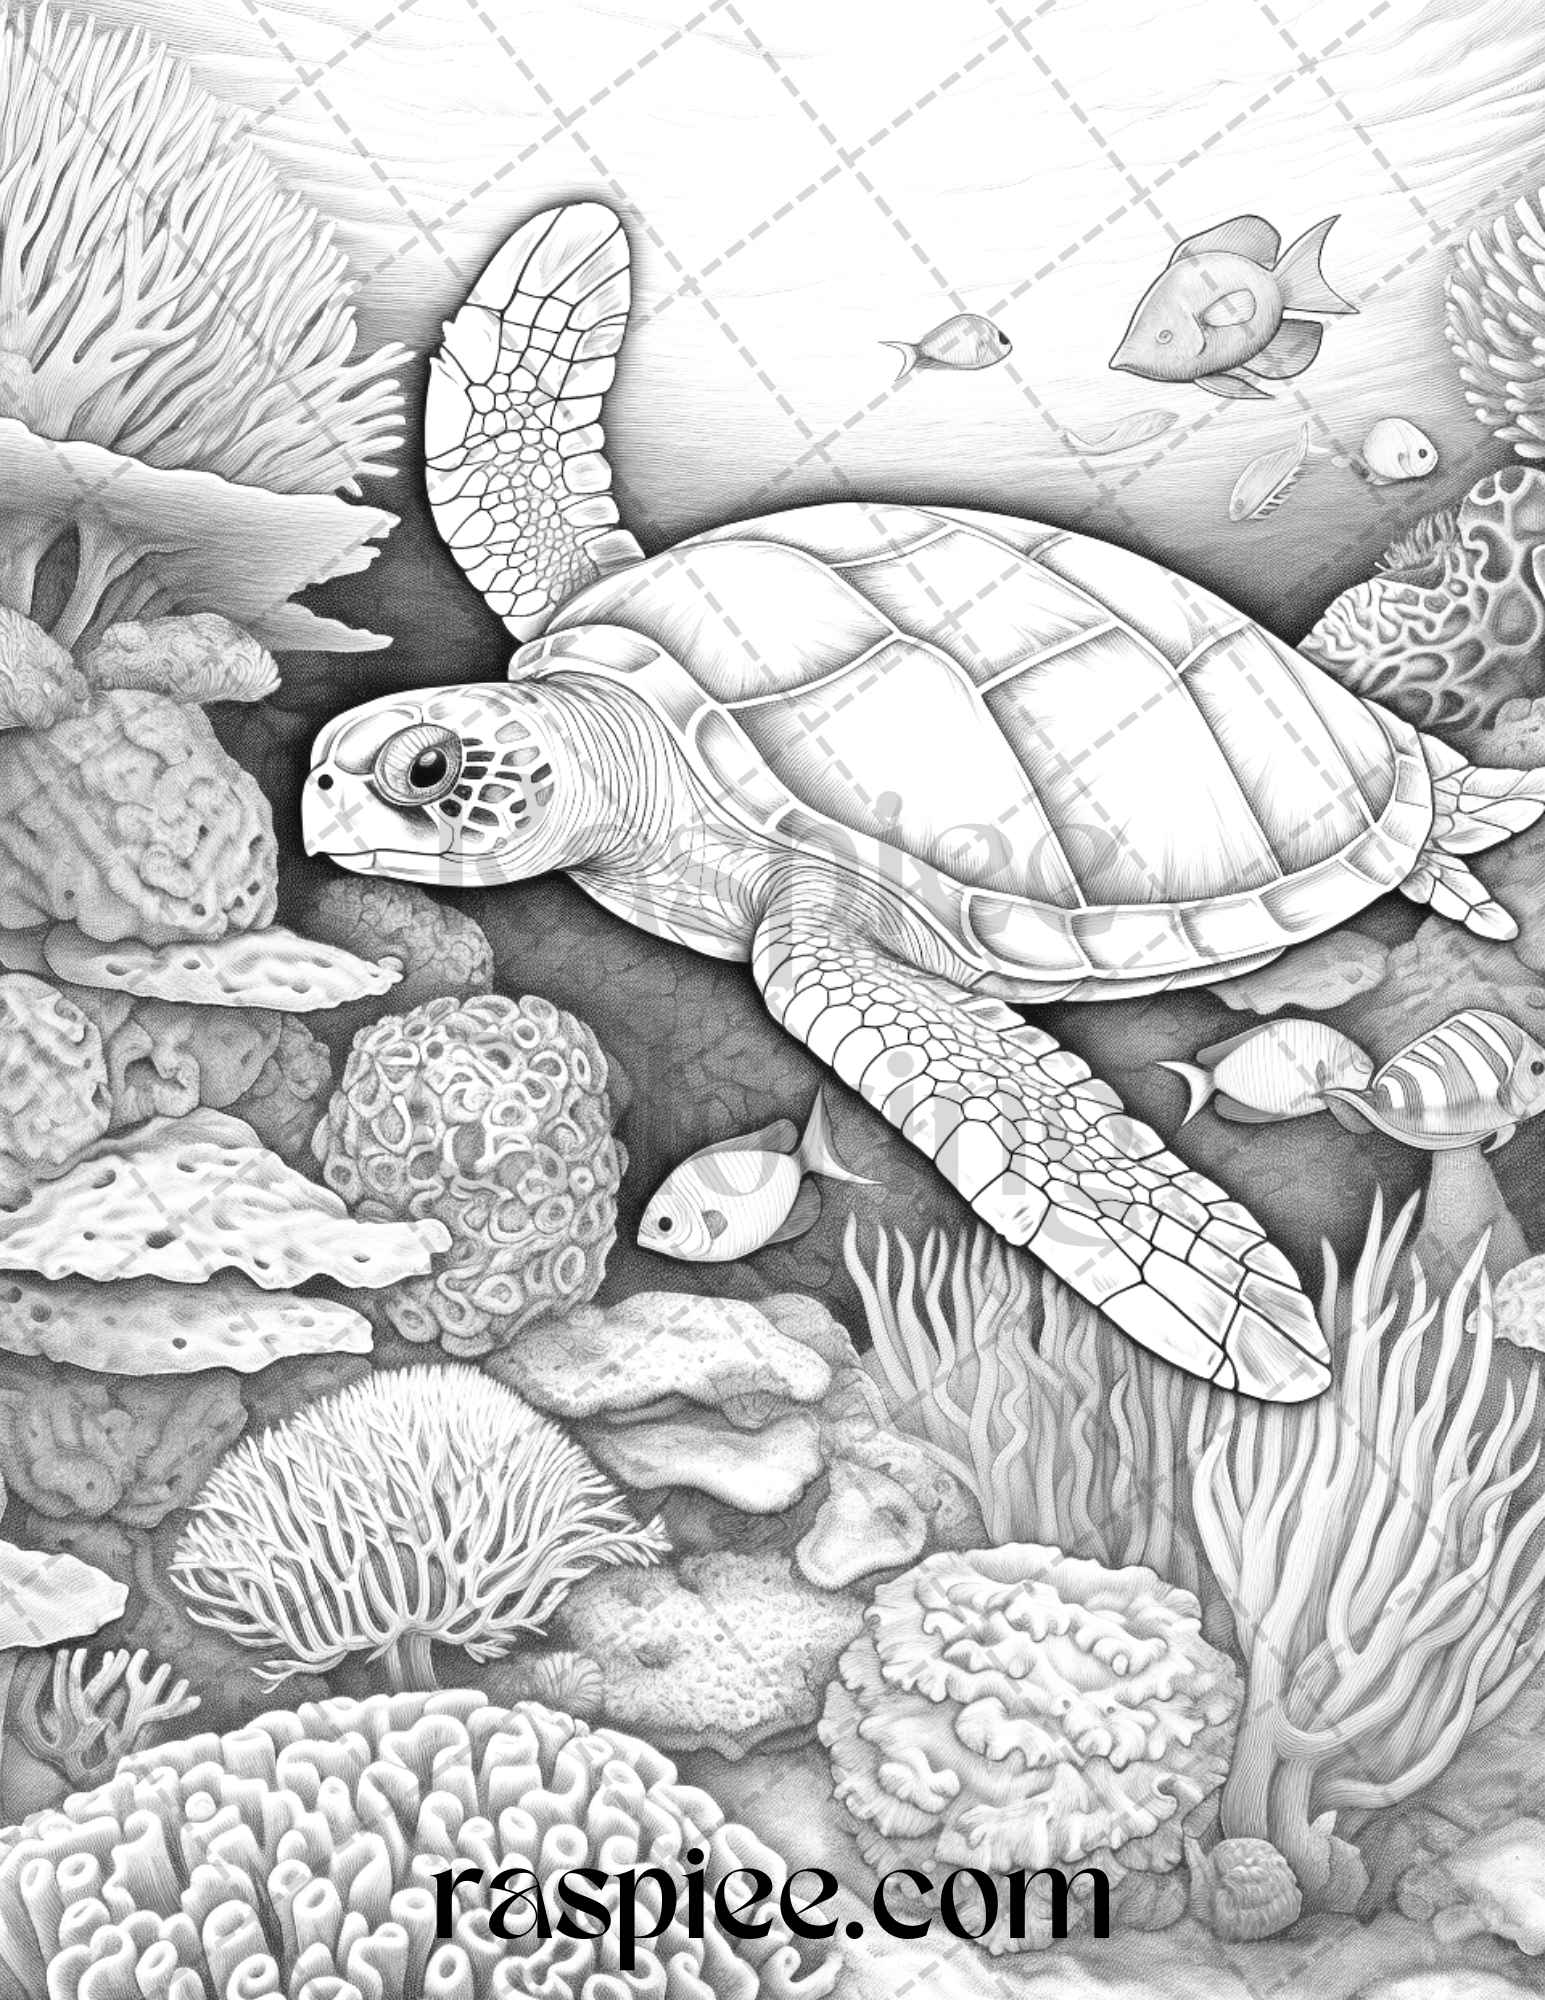 Ocean life grayscale coloring pages printable for adults relaxation an â coloring